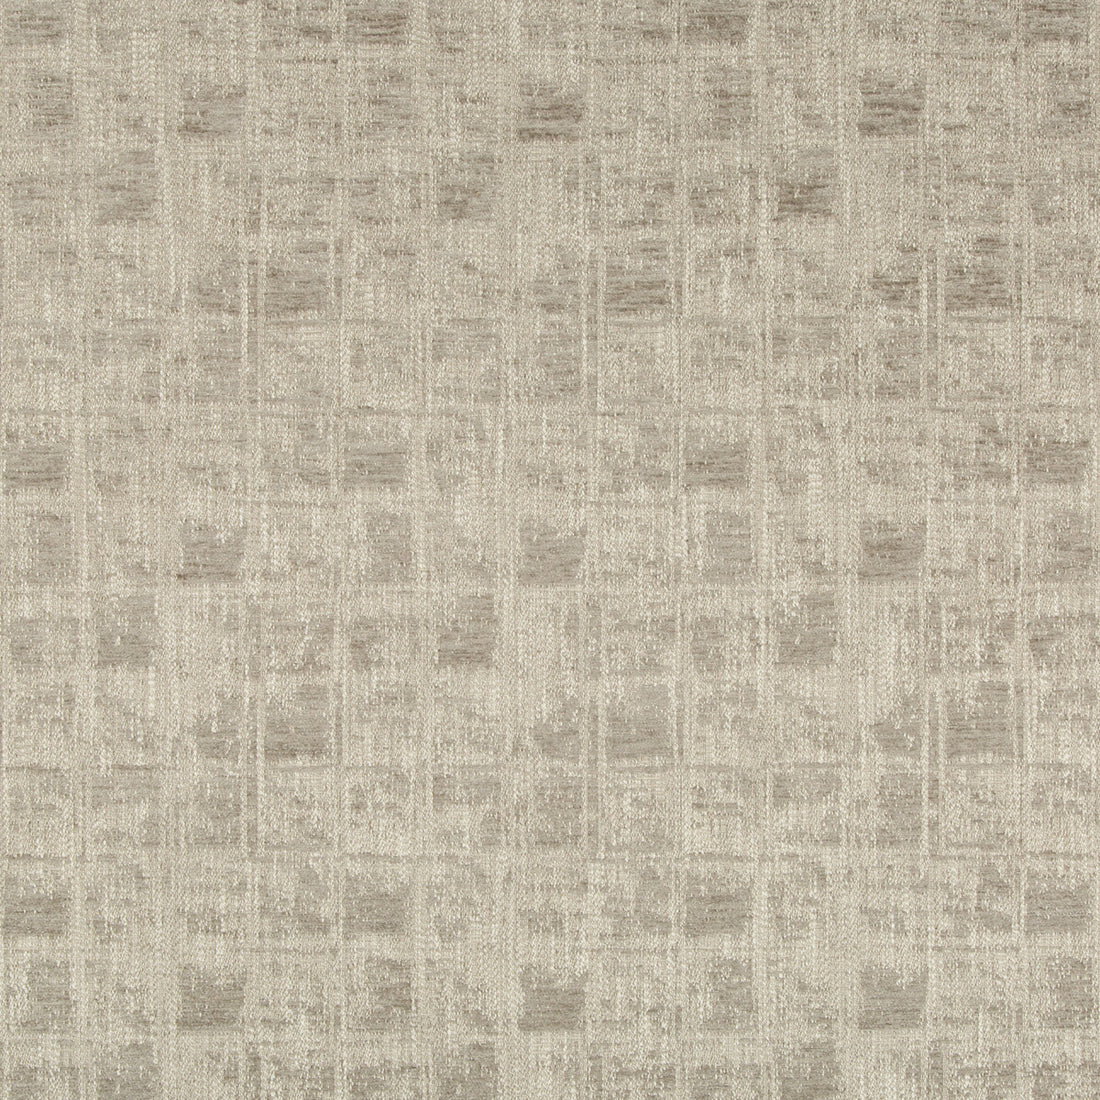 Kravet Couture fabric in 36644-11 color - pattern 36644.11.0 - by Kravet Couture in the Mabley Handler collection